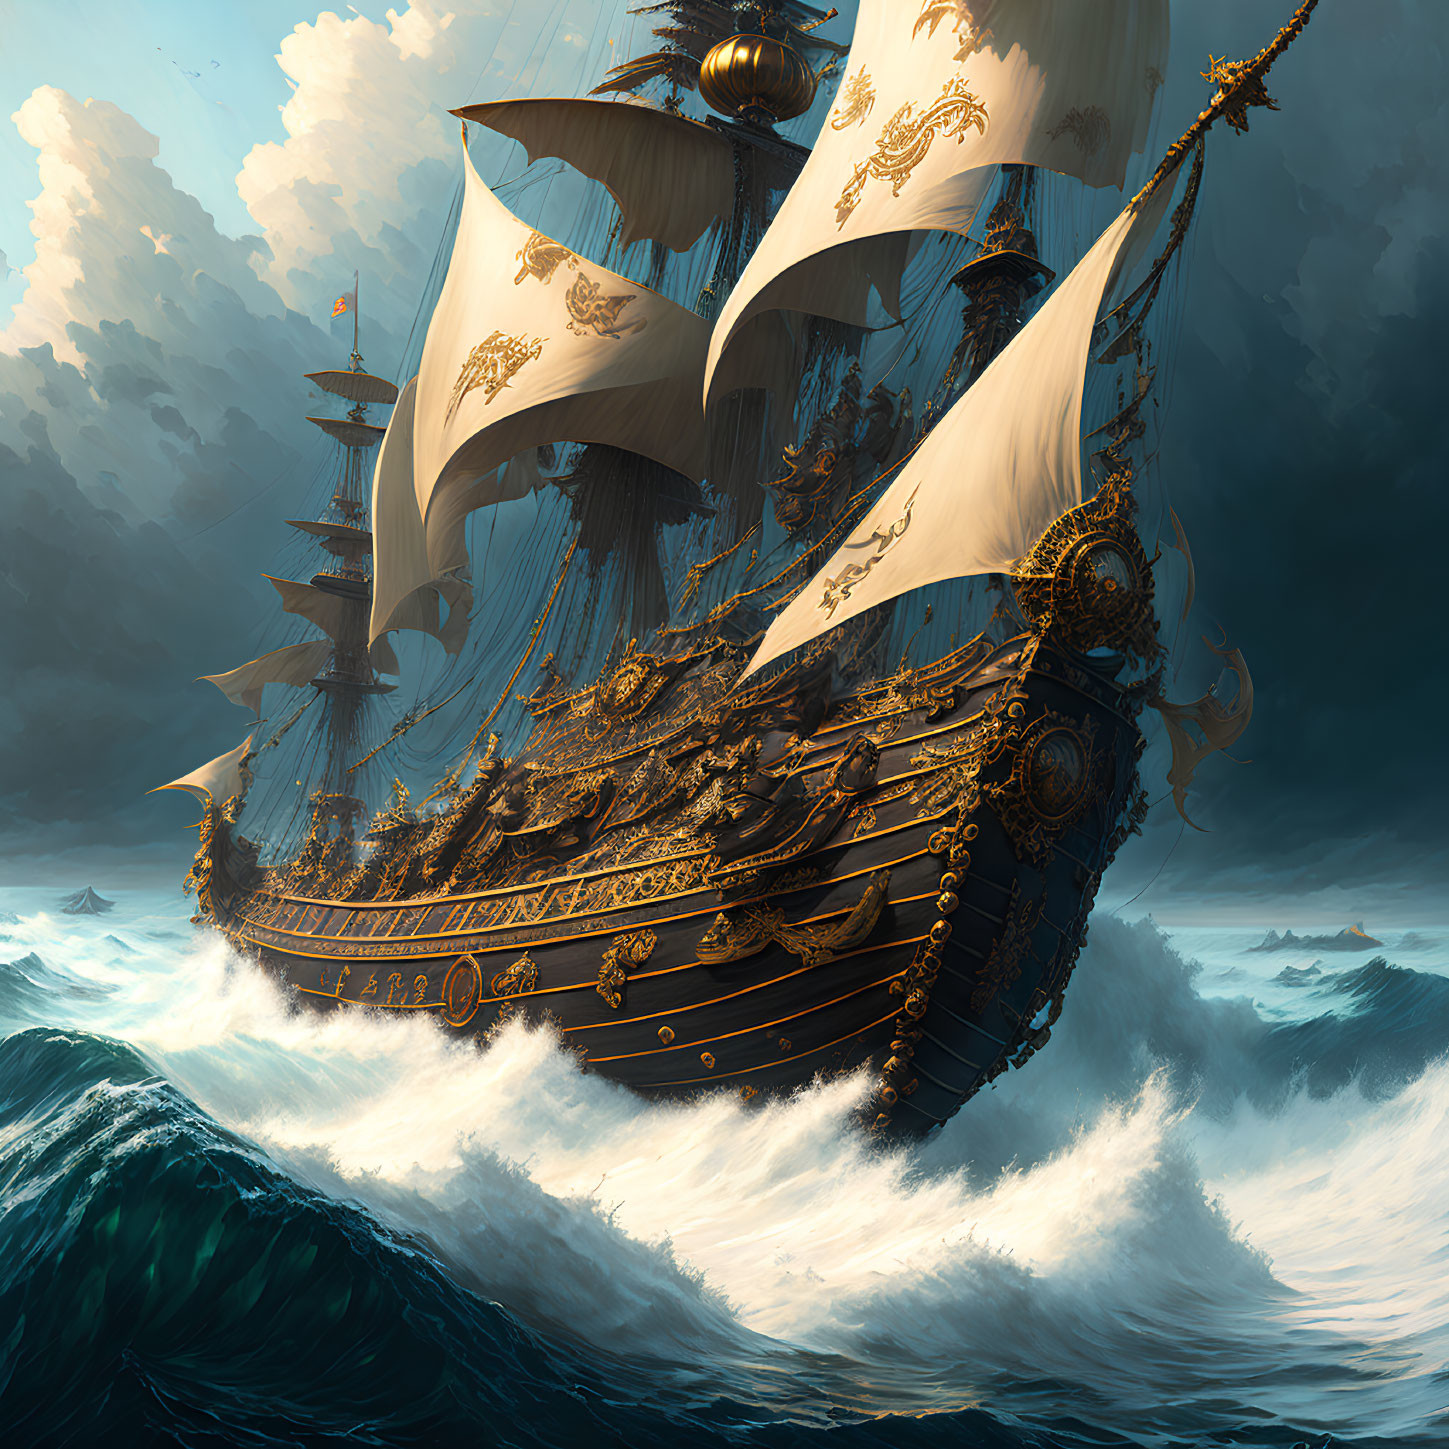 Elaborate golden decorations on ornate sailing ship in turbulent sea waves